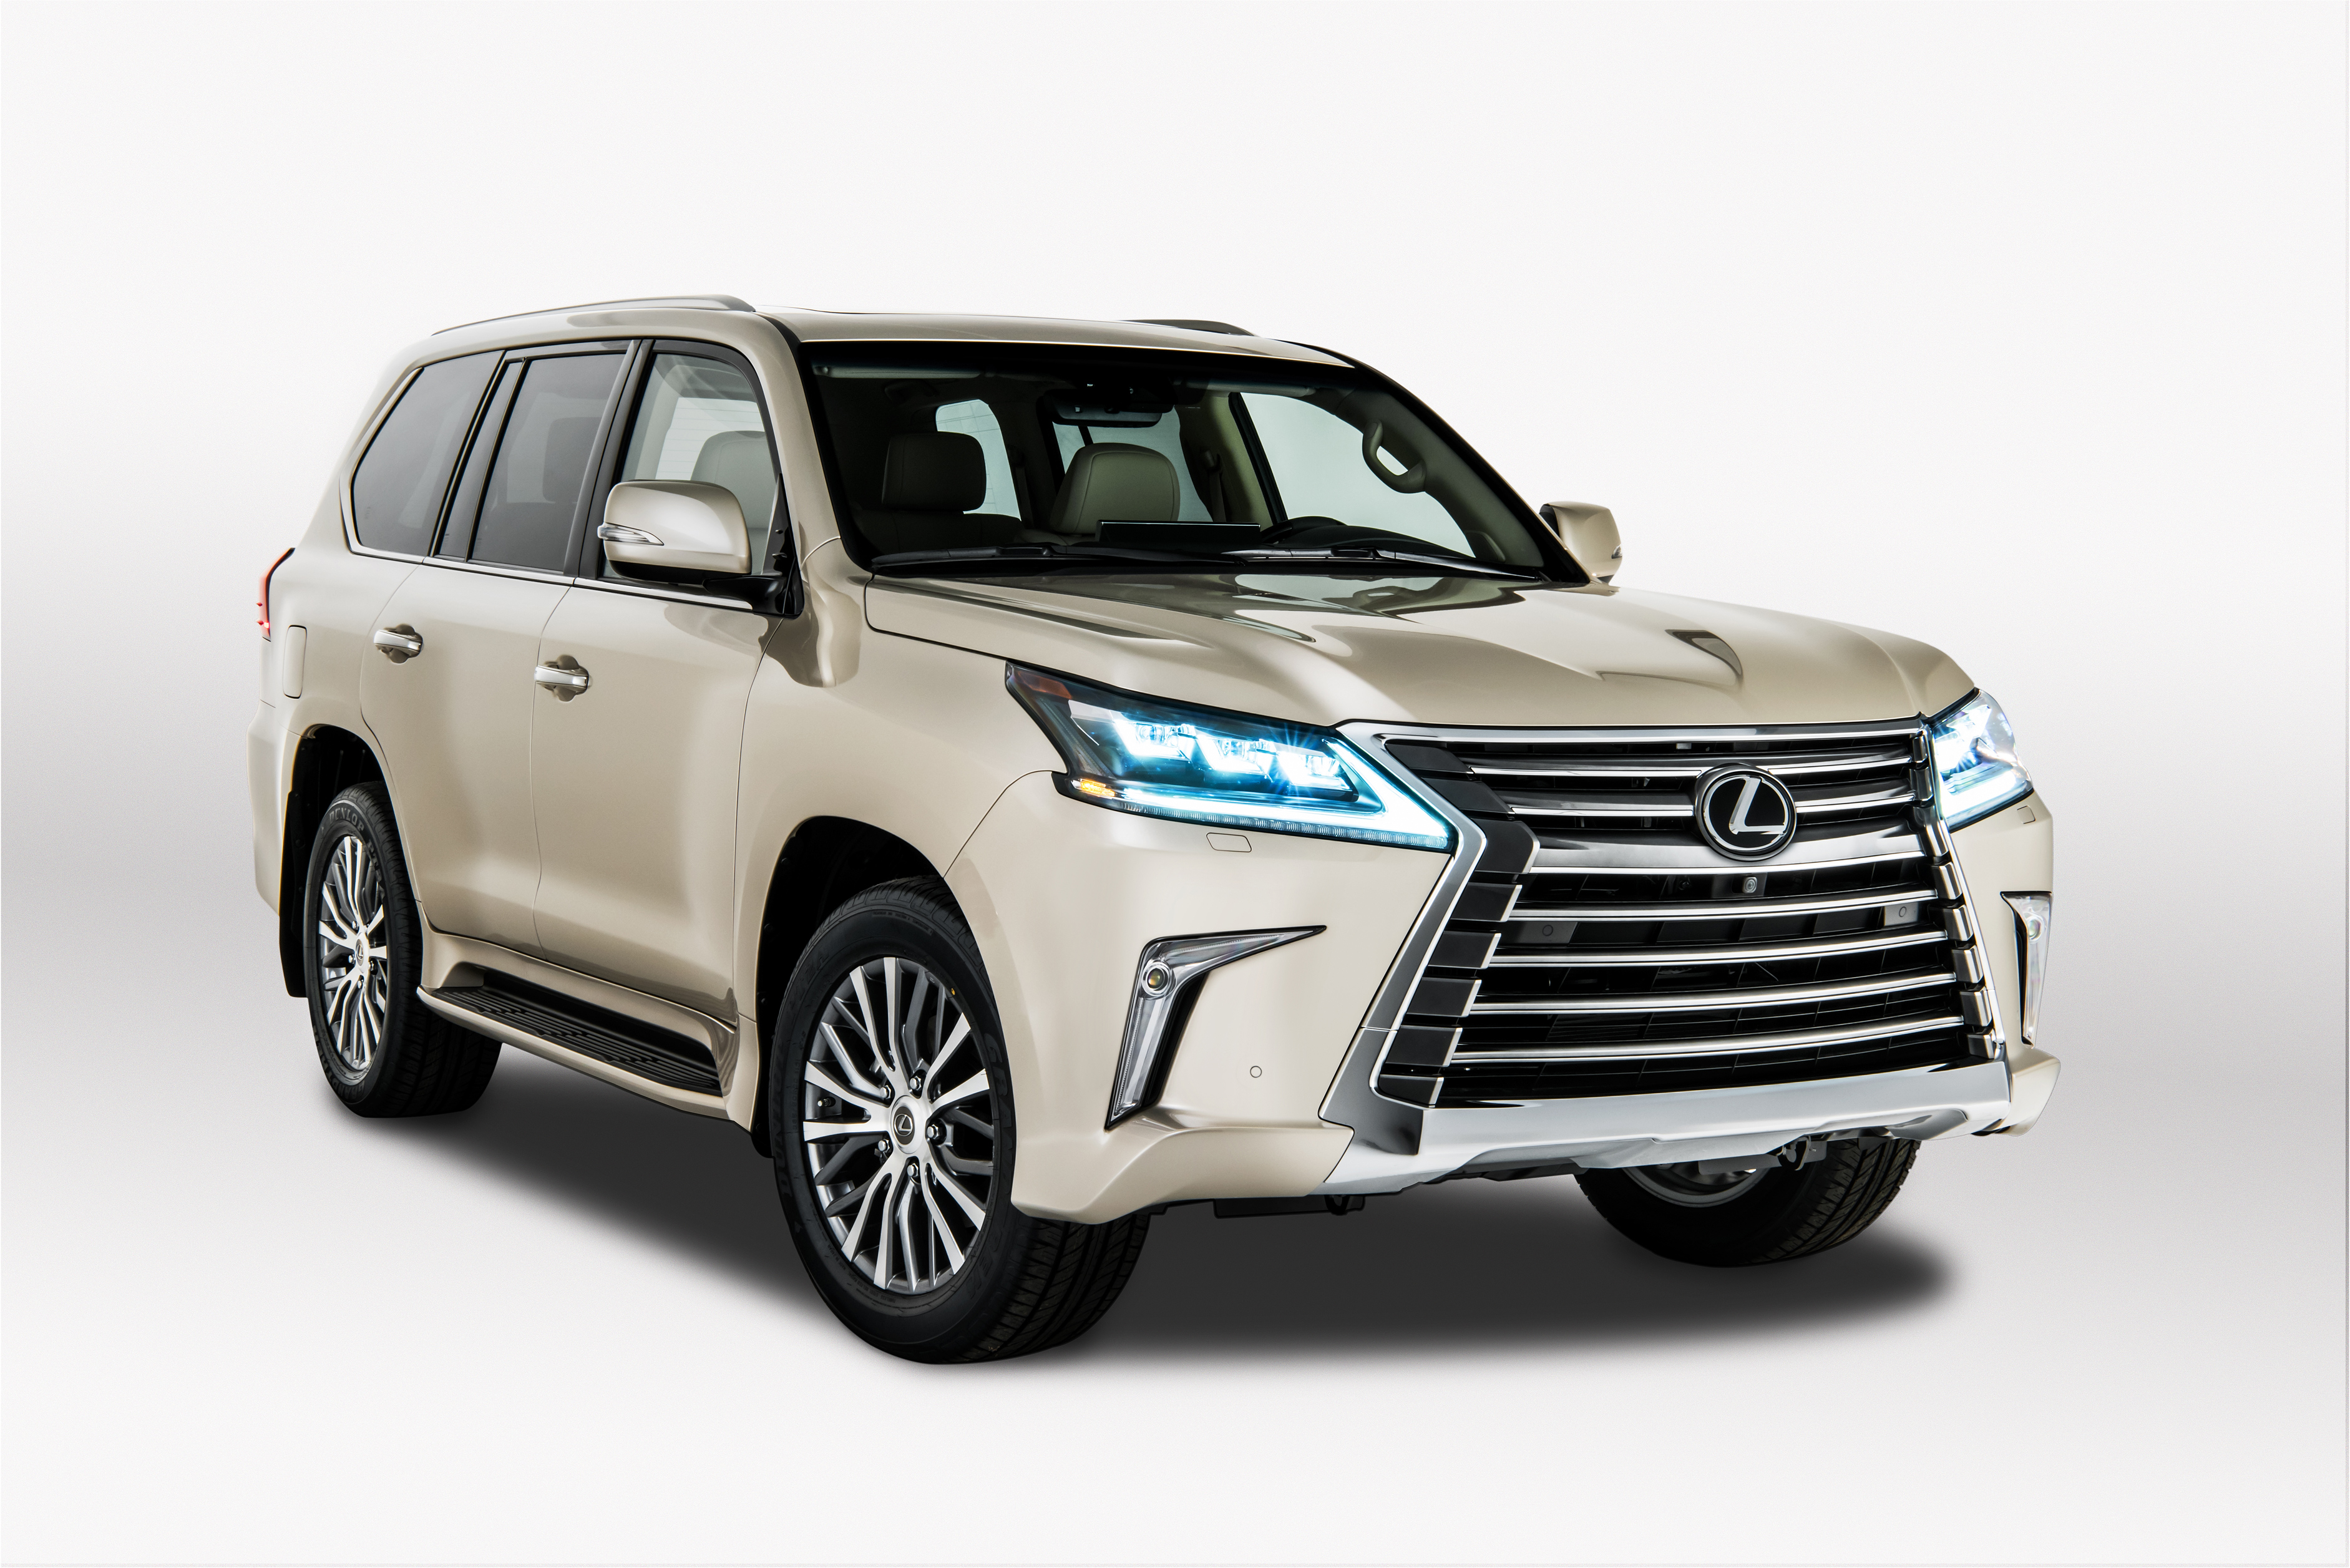 Adventurers Get More Cargo Space with Lexus' New Two-Row Version of LX 570  - Lexus USA Newsroom